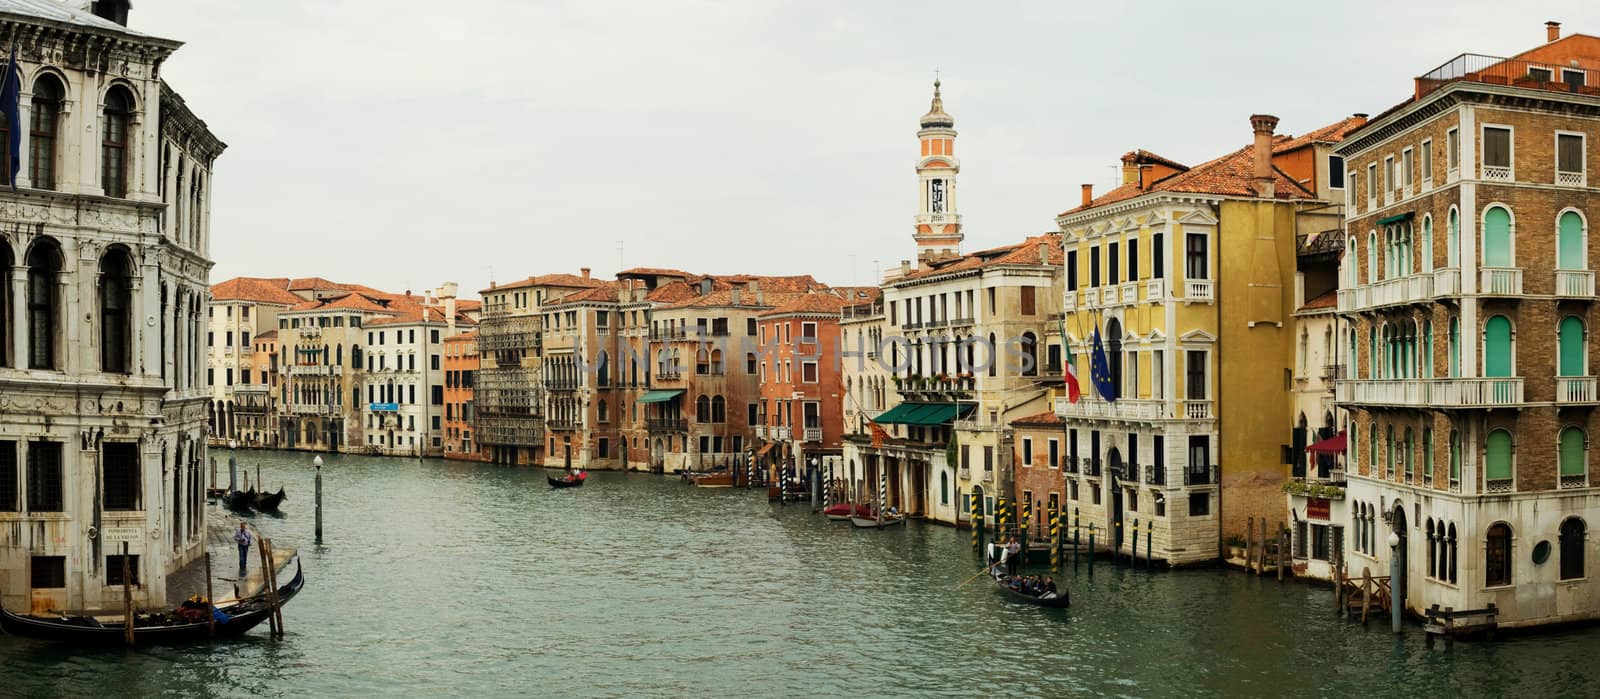 Grand Canal, the most canal in Venice, Italy